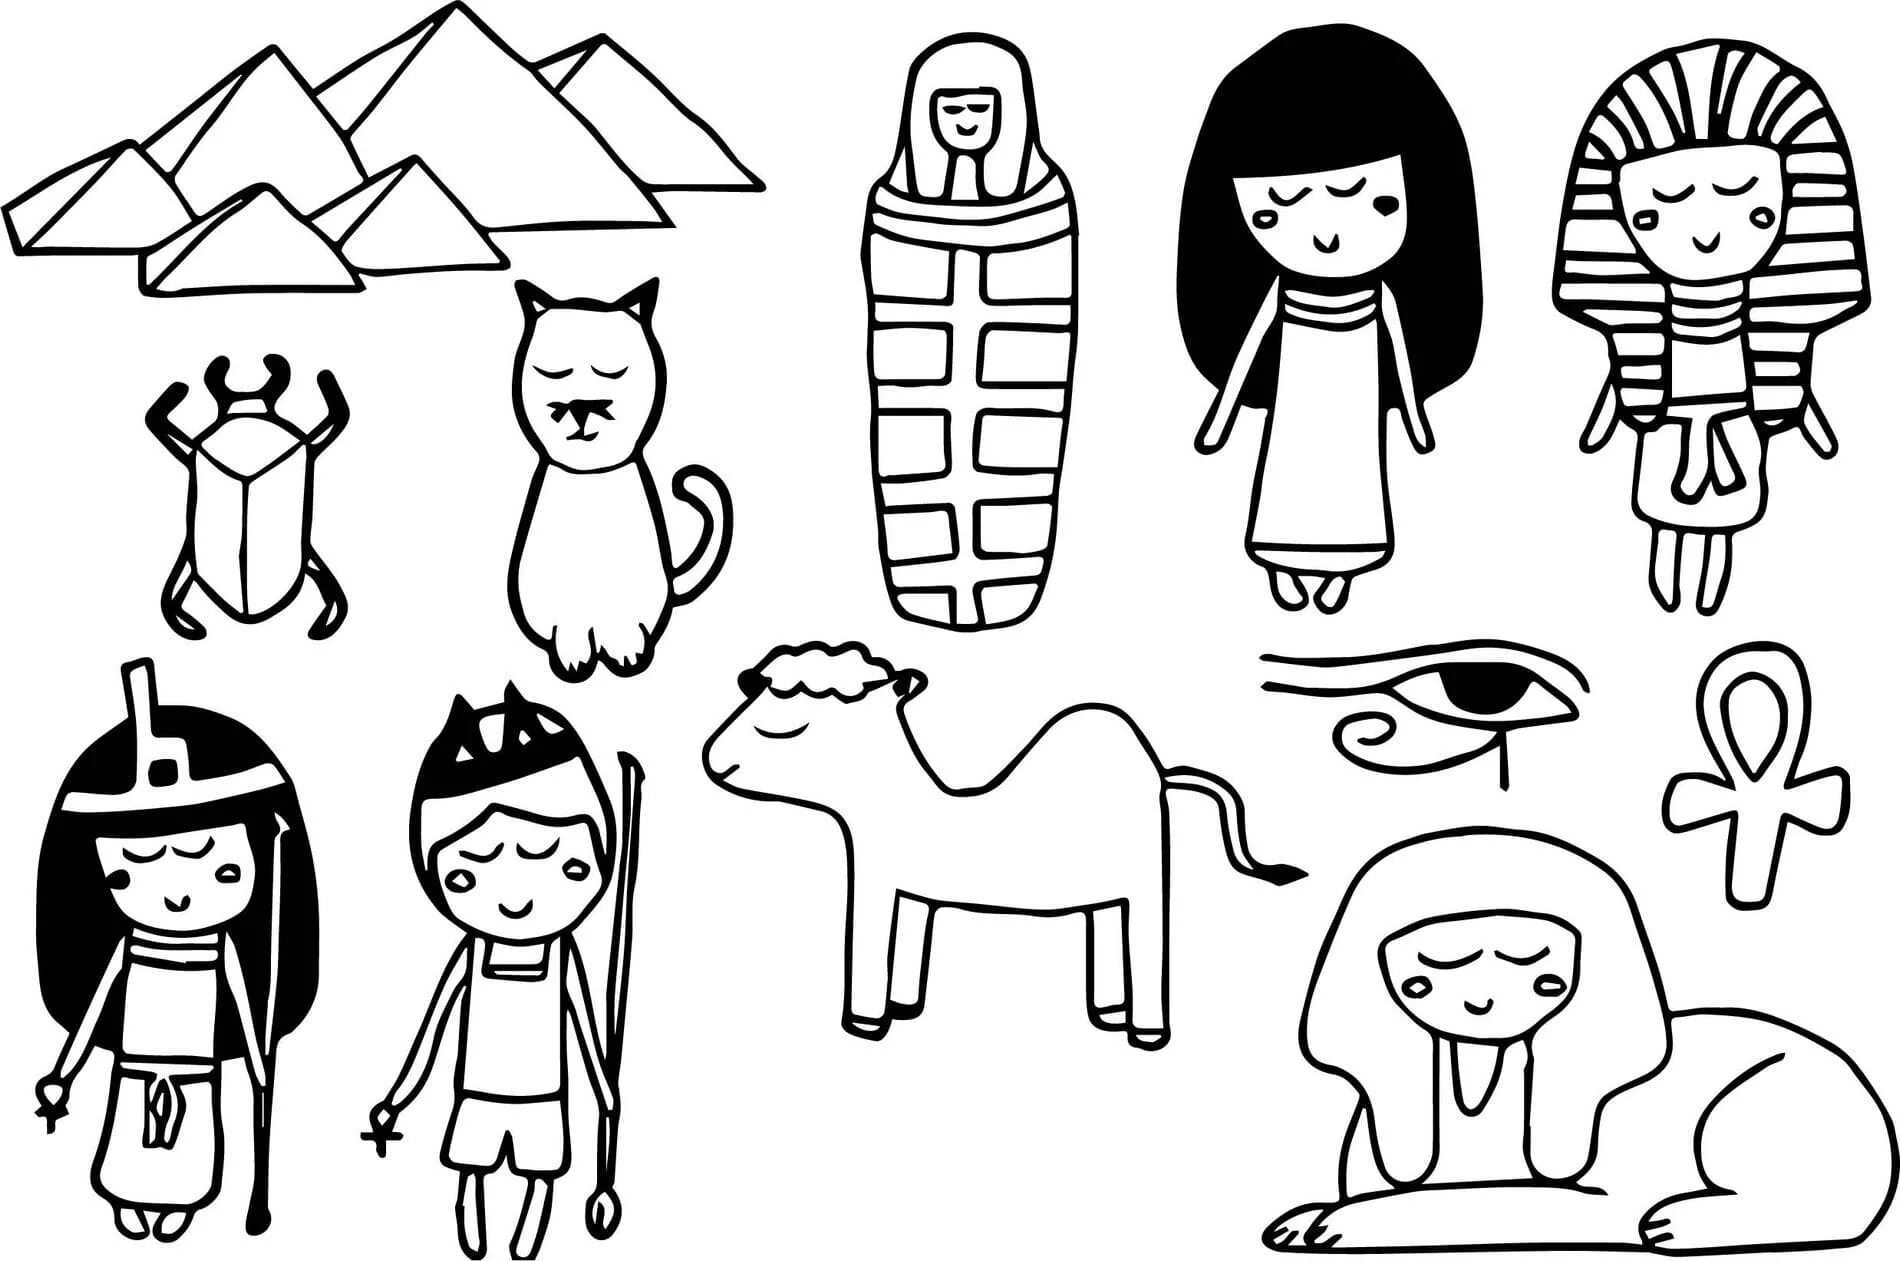 Ancient egypt for kids #4